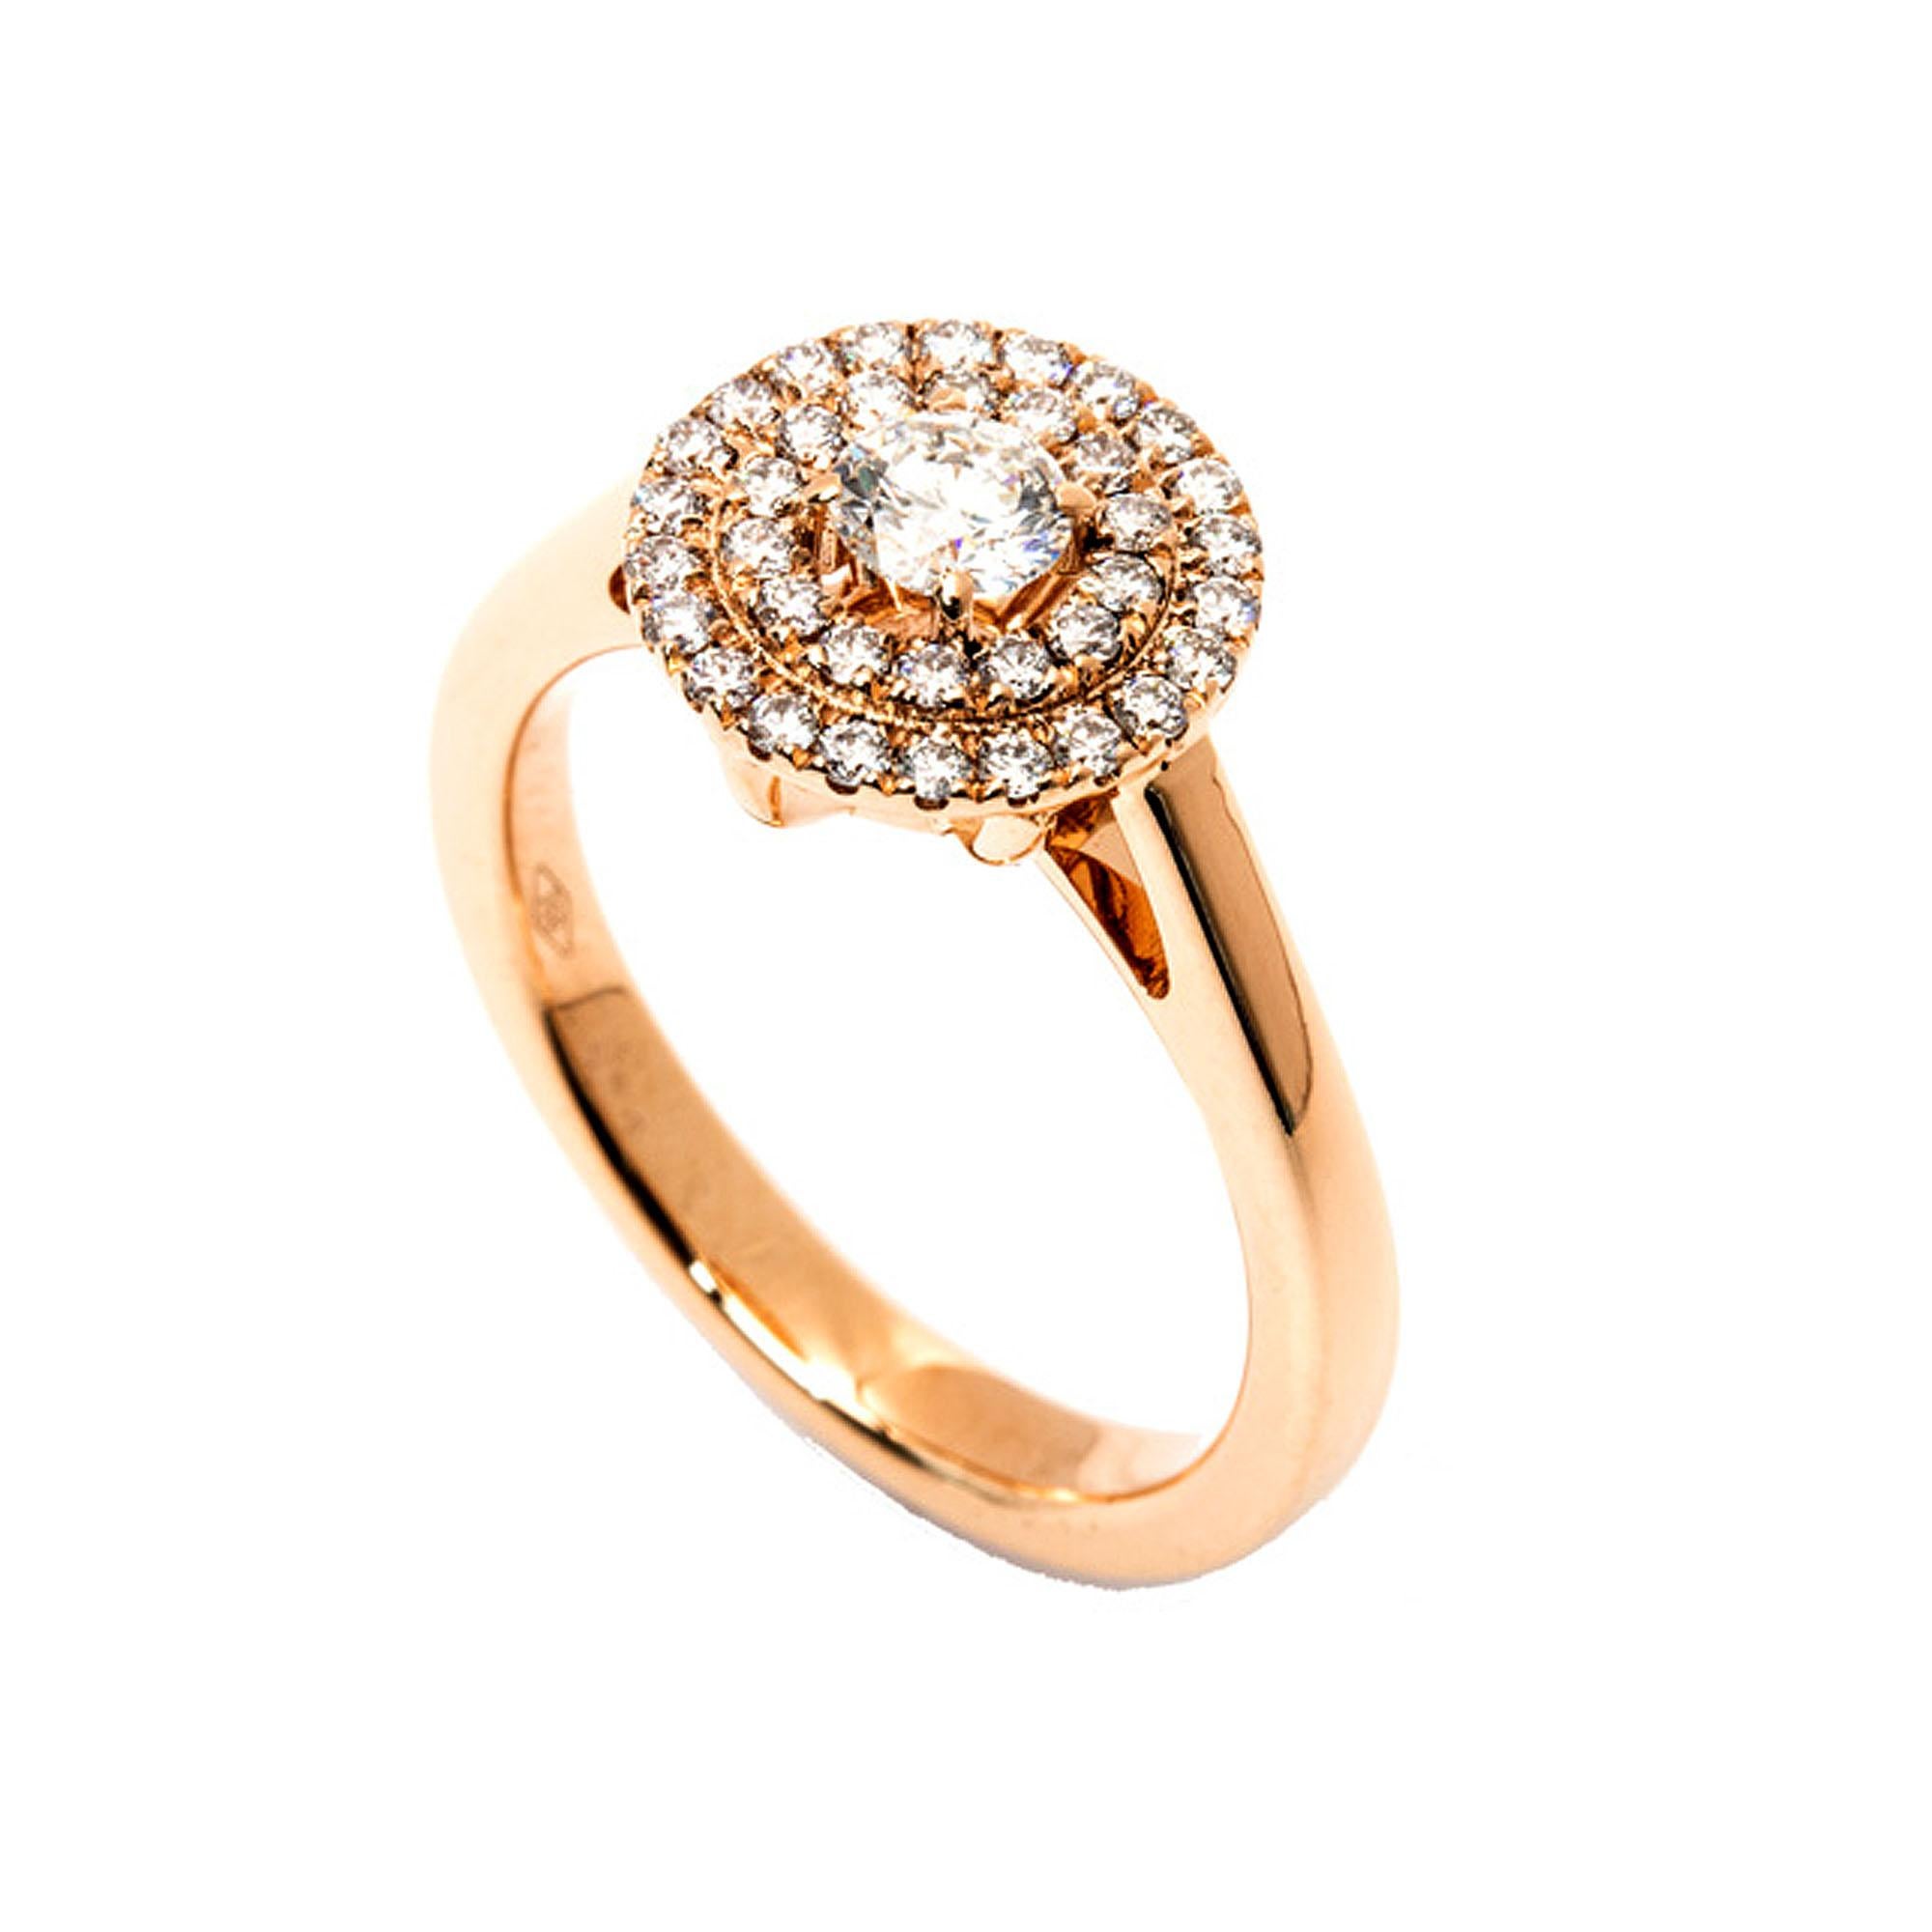 Presenting a breathtaking piece of jewelry, the GIA Certified Round Diamond Gold Double Halo Ring—a true testament to sophistication and timeless elegance. This exquisite ring features a centrally placed 0.50-carat diamond, certified by the